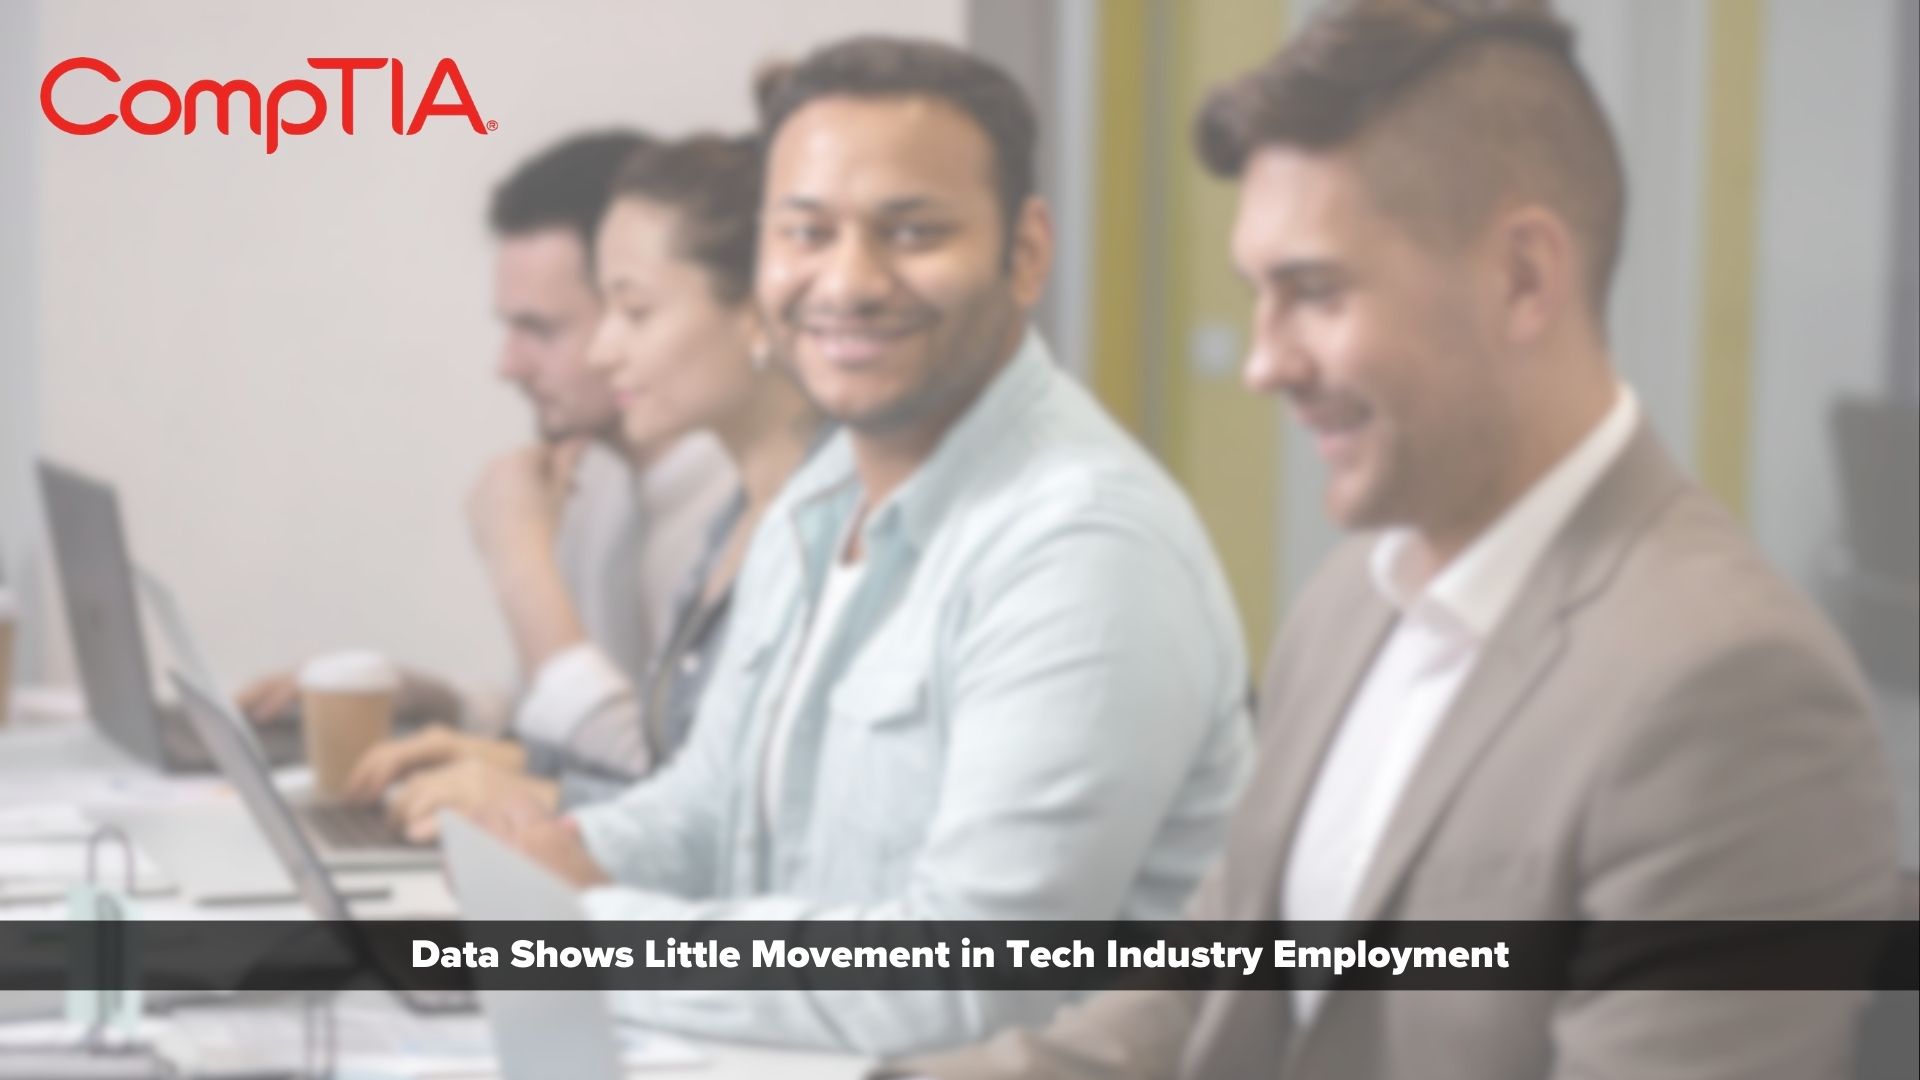 Technology+hiring+intent+is+at+its+highest+point+since+last+year%2C+CompTIA+Reporting+shows+%26%238211%3B+TechBuzz+News